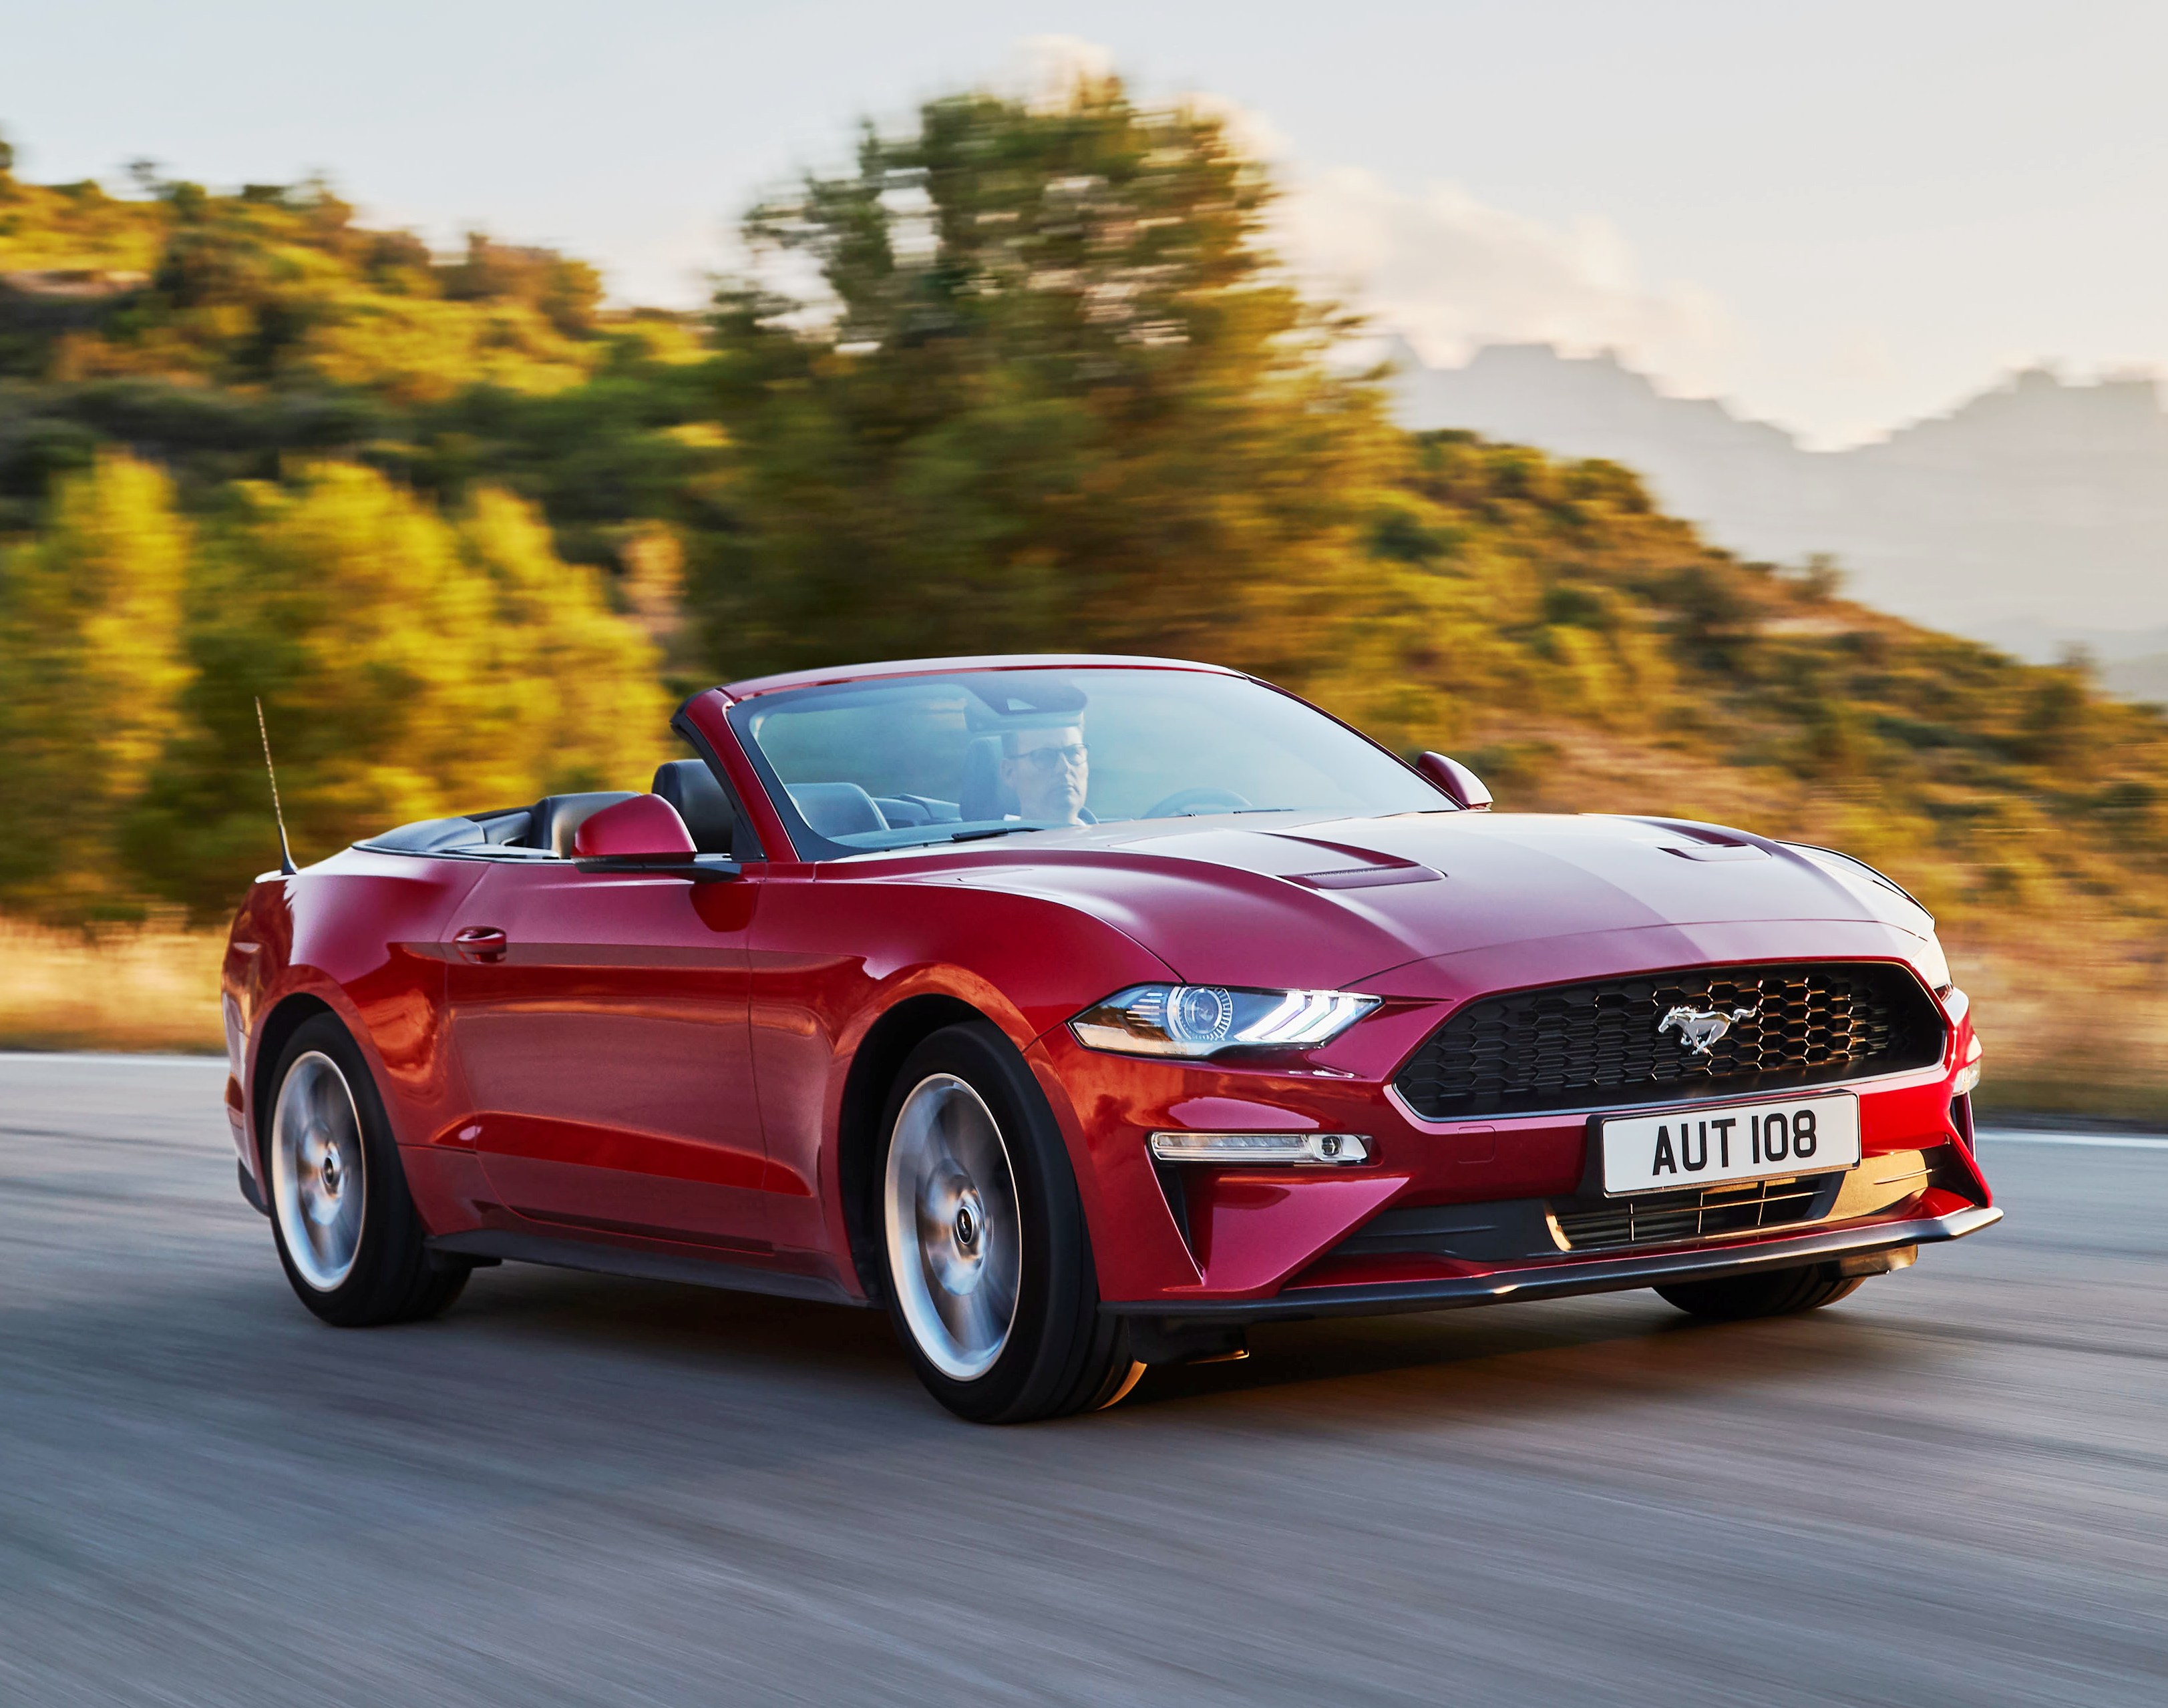 Sunday drive New Ford Mustang Convertible 5.0 V8 Wheels Within Wales